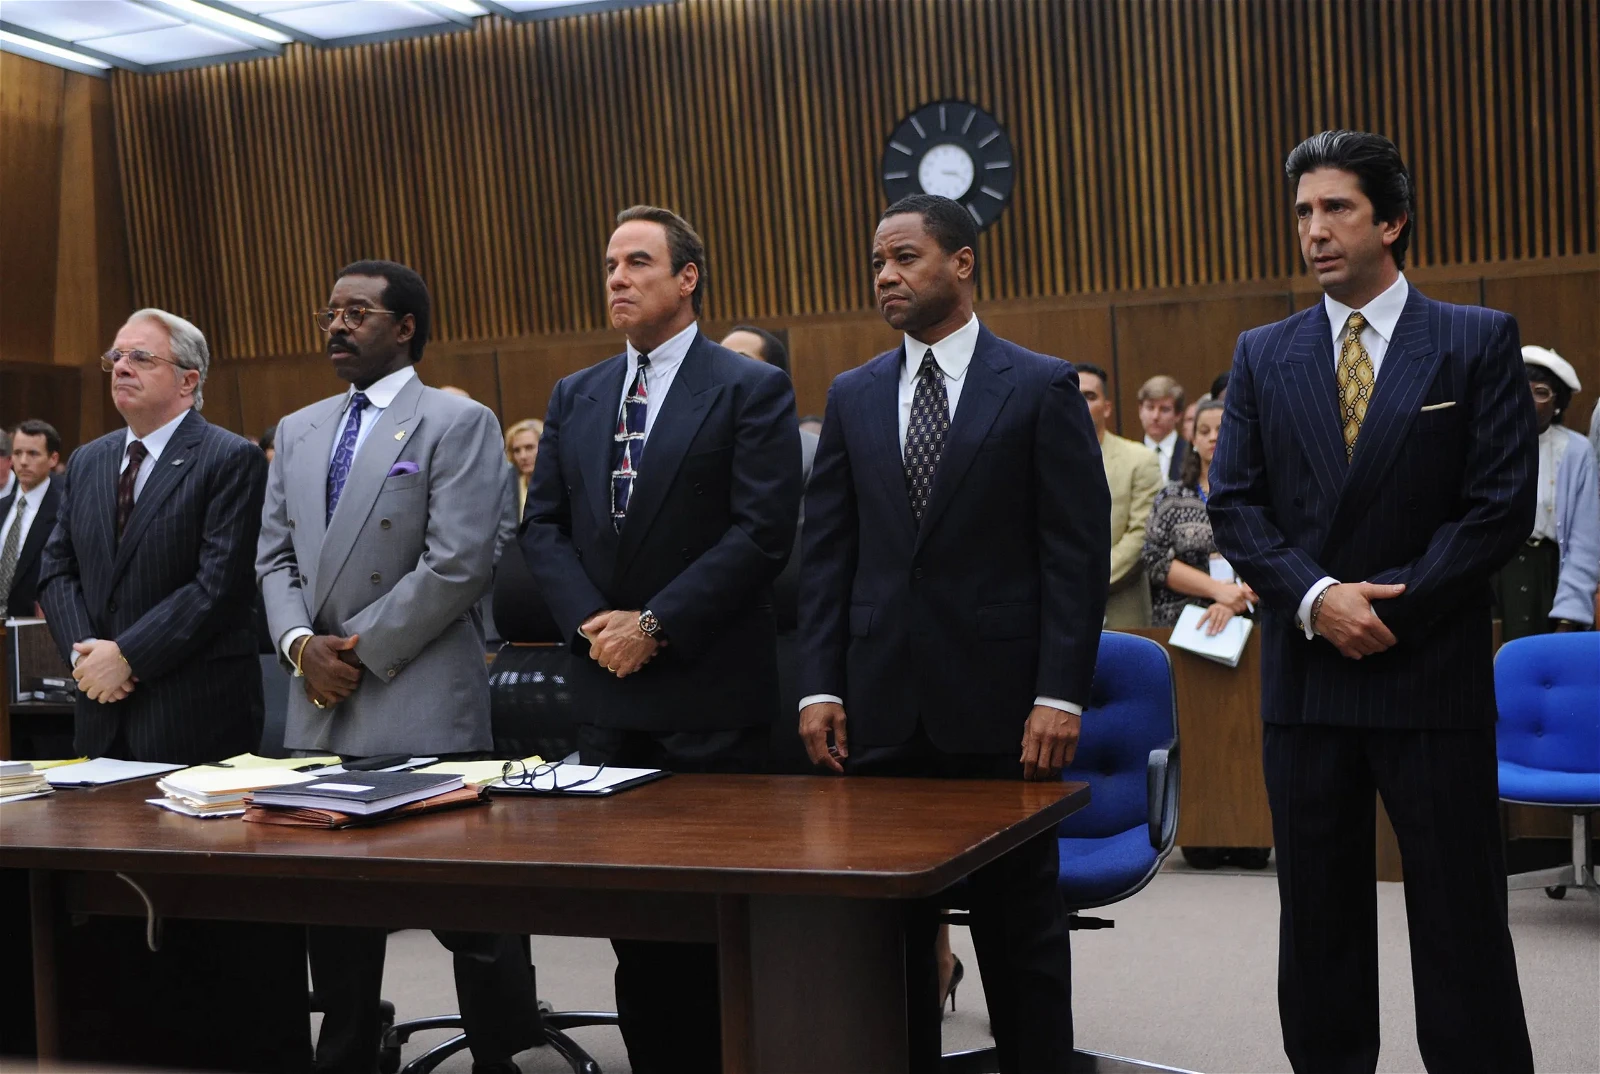 John Travolta with Cuba Gooding Jr. and David Schwimmer in The People v. O. J. Simpson